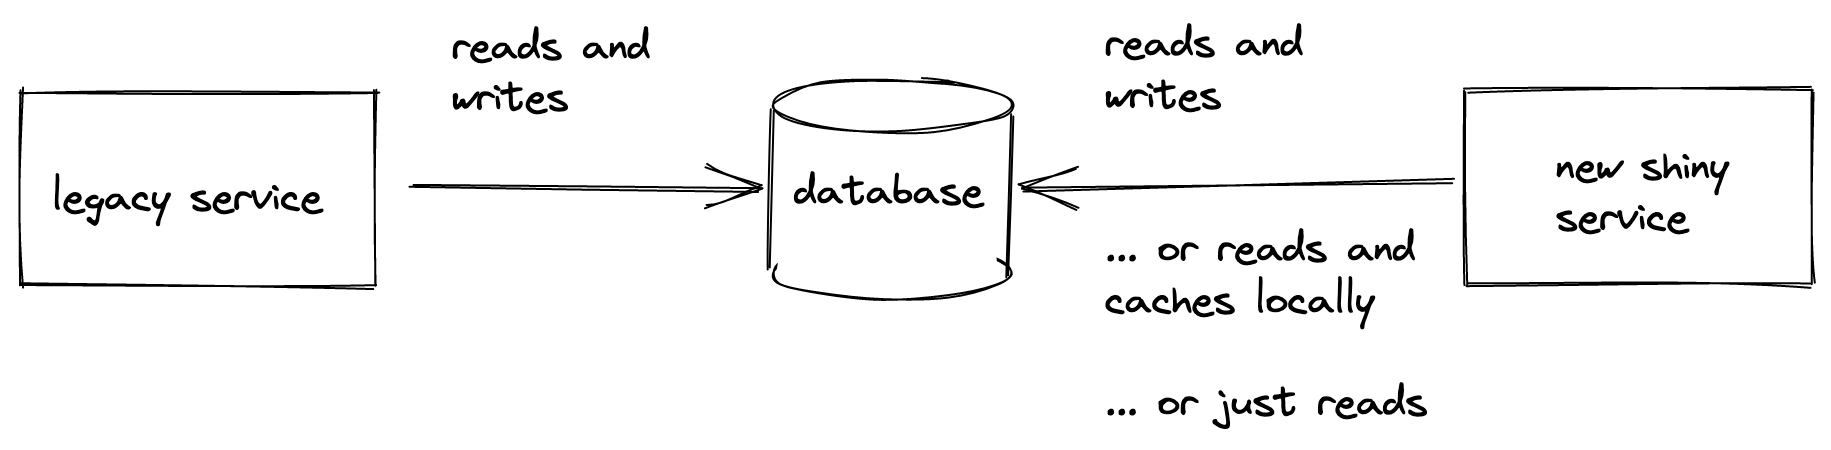 Two services sharing the database